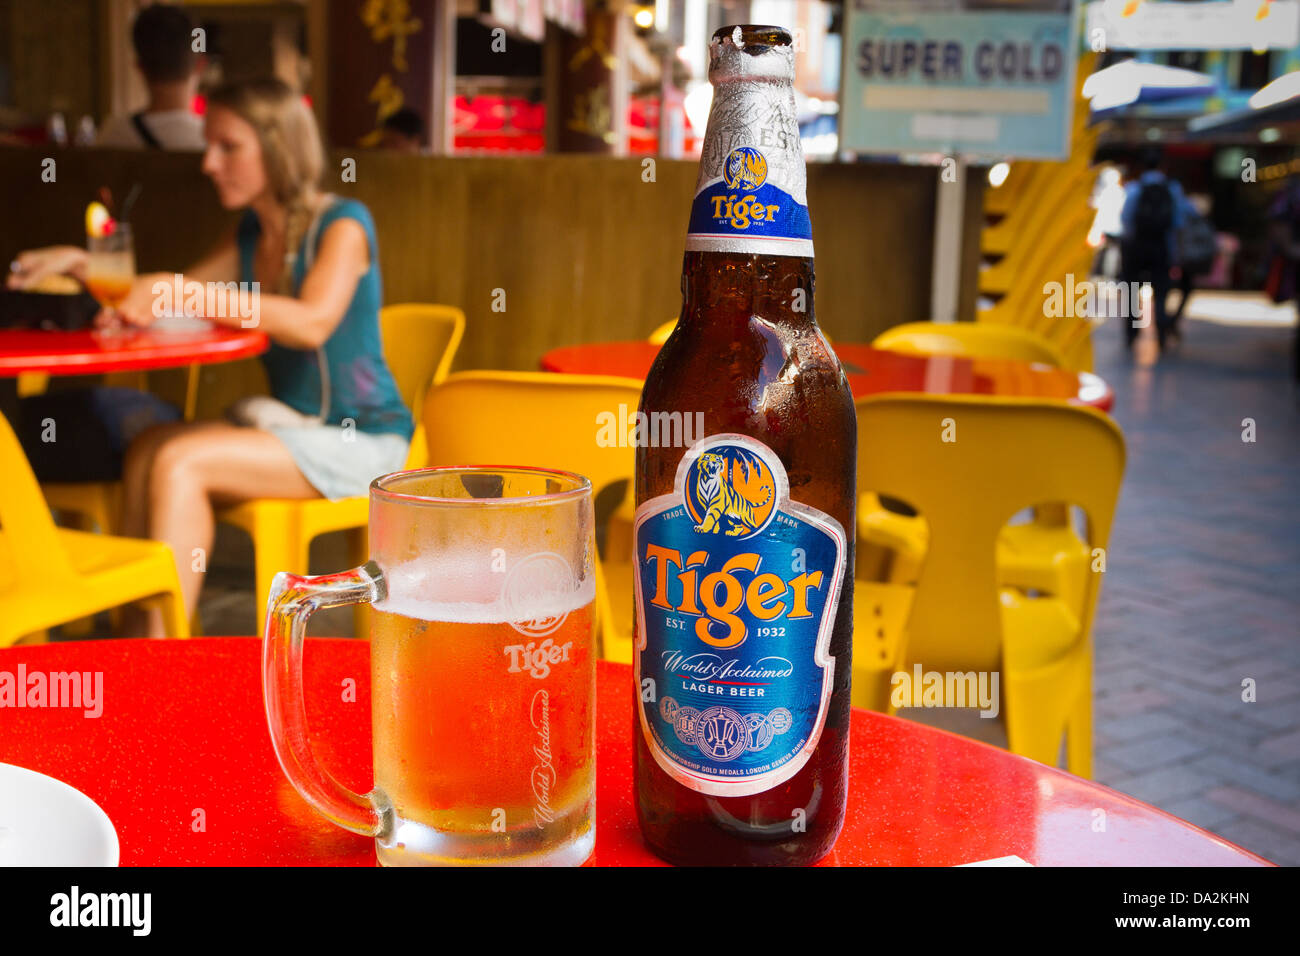 Bottle and glass of cold Tiger beer on a red table at a Chinese restaurant, Chinatown, Singapore Stock Photo